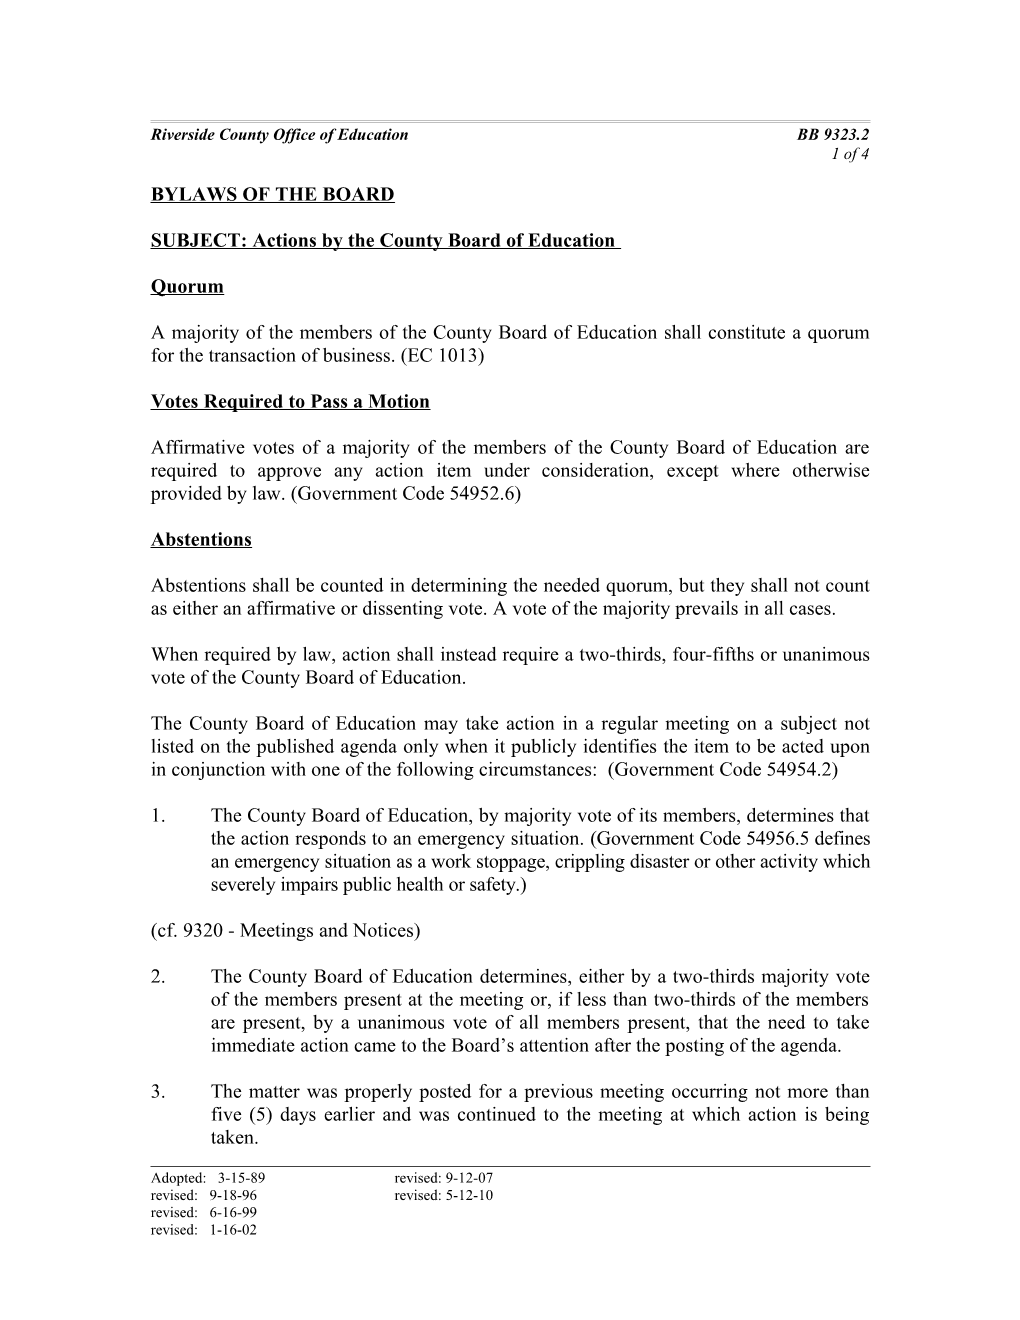 Bylaws of the Board